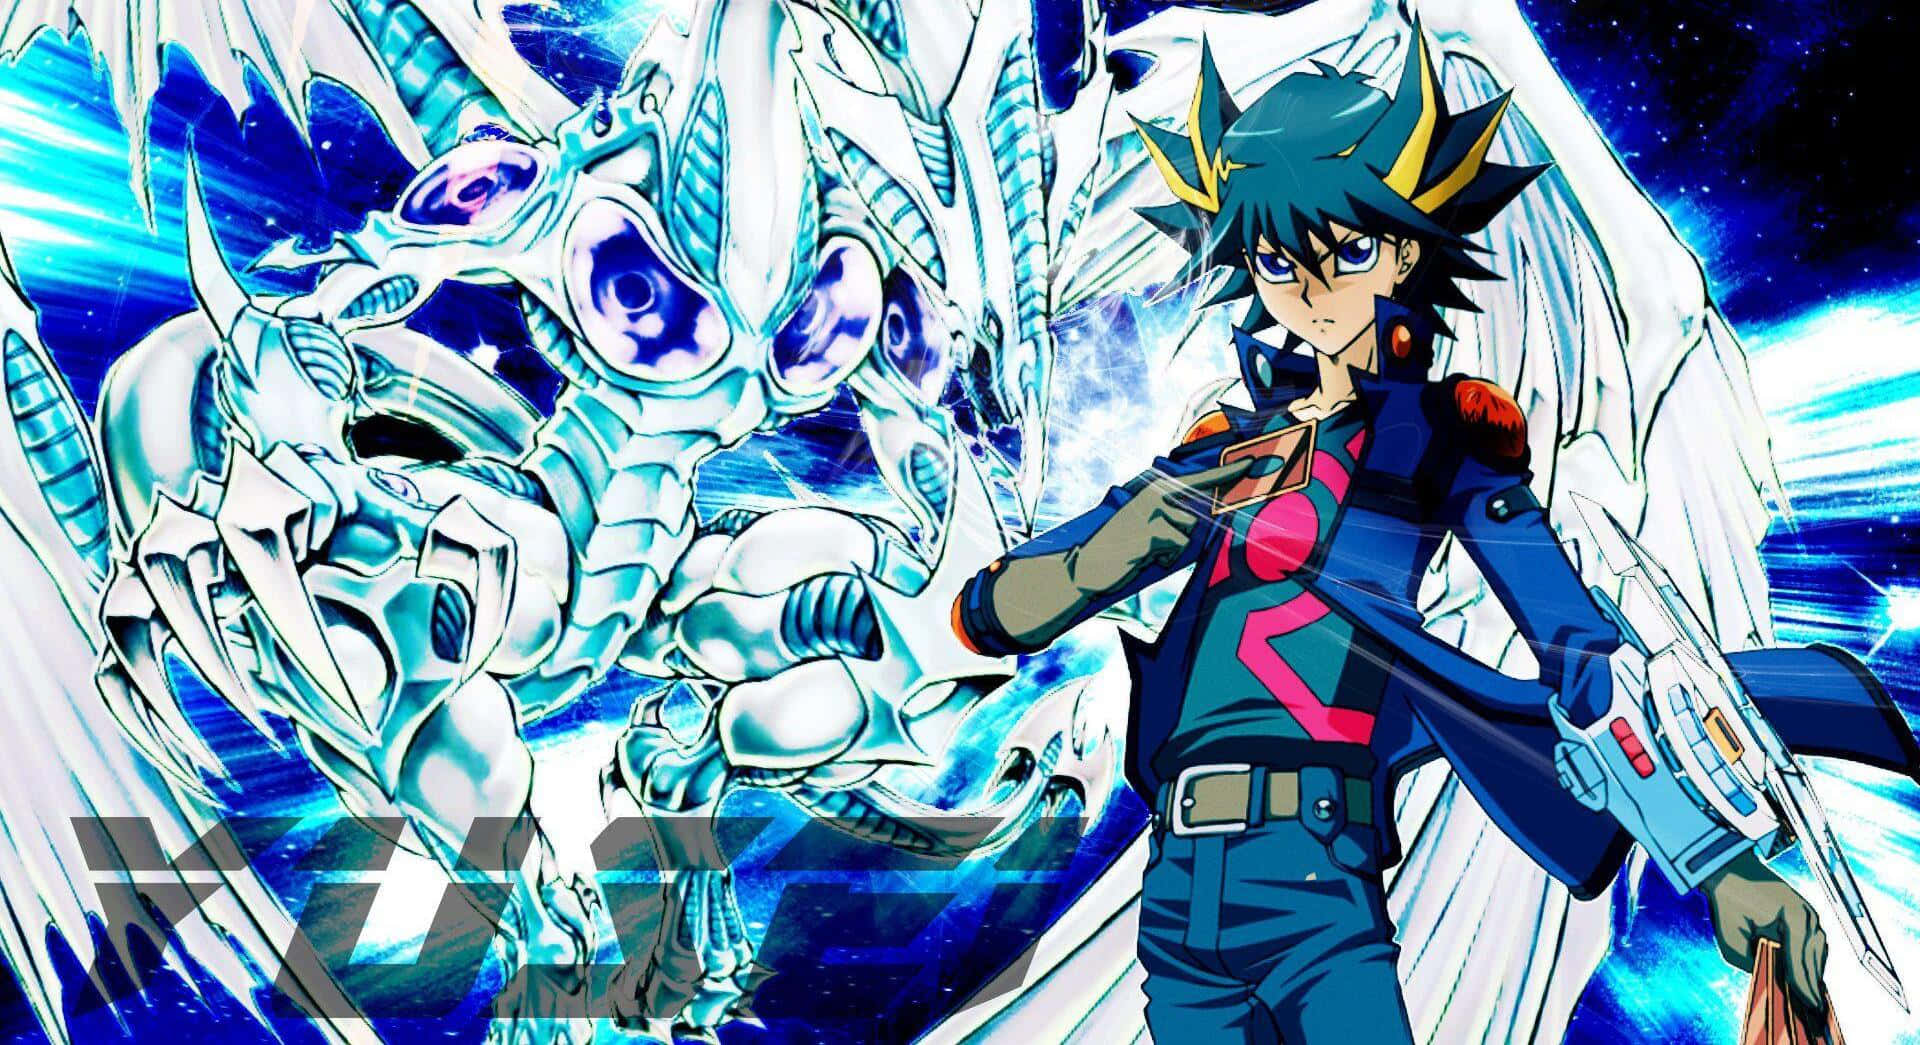 Download Yusei Fudo from Yu-Gi-Oh! 5D's in an intense duel against